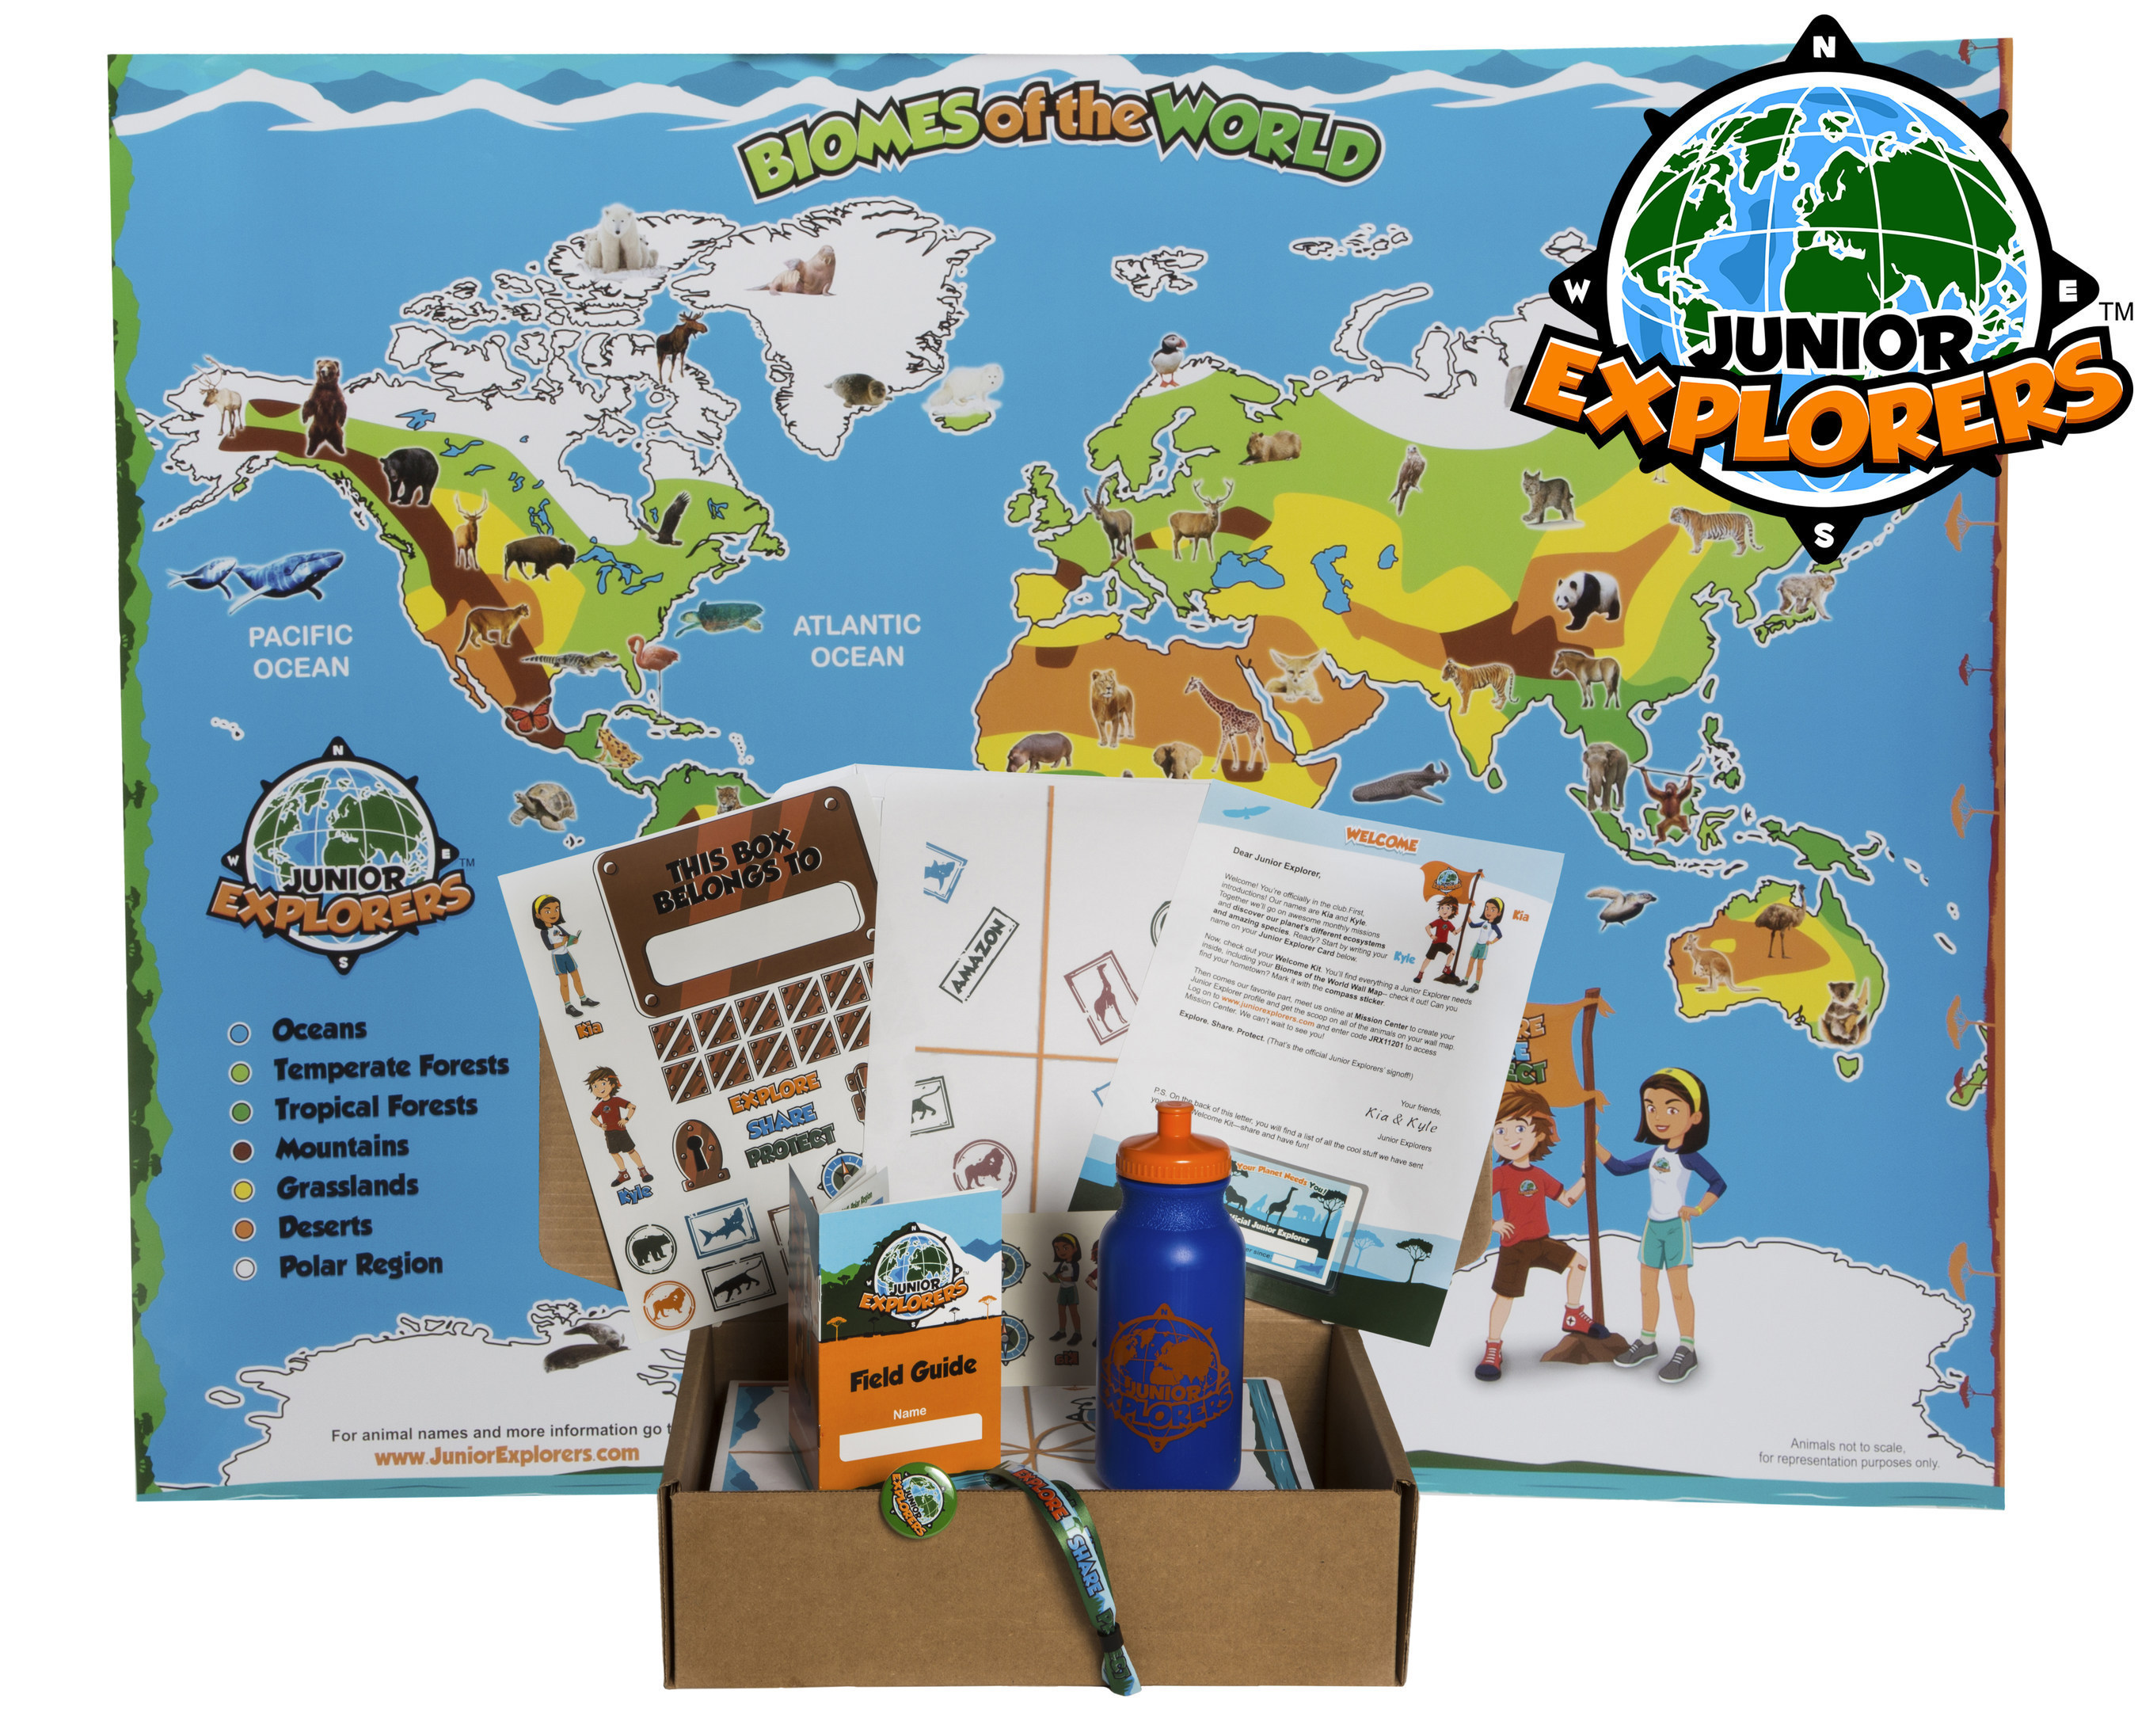 Junior Explorers Inc. is a Brooklyn, NY based edu-tech social enterprise launching a monthly subscription program with a mission to inspire the next generation of environmental stewards. The company develops products and digital experiences that connect kids to the planet.